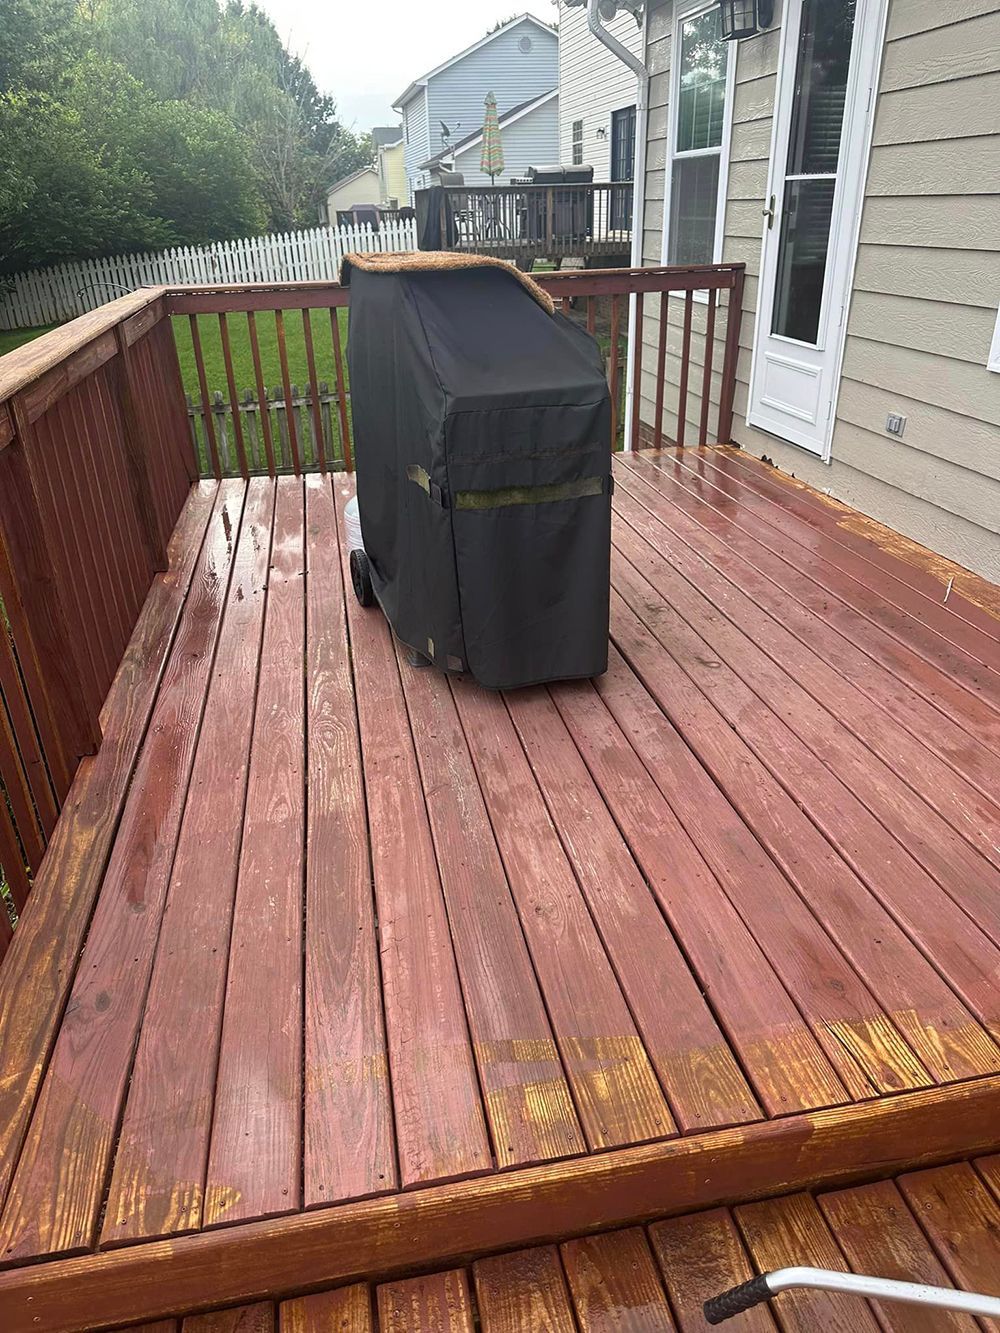 A wooden deck with a grill and a cover on it